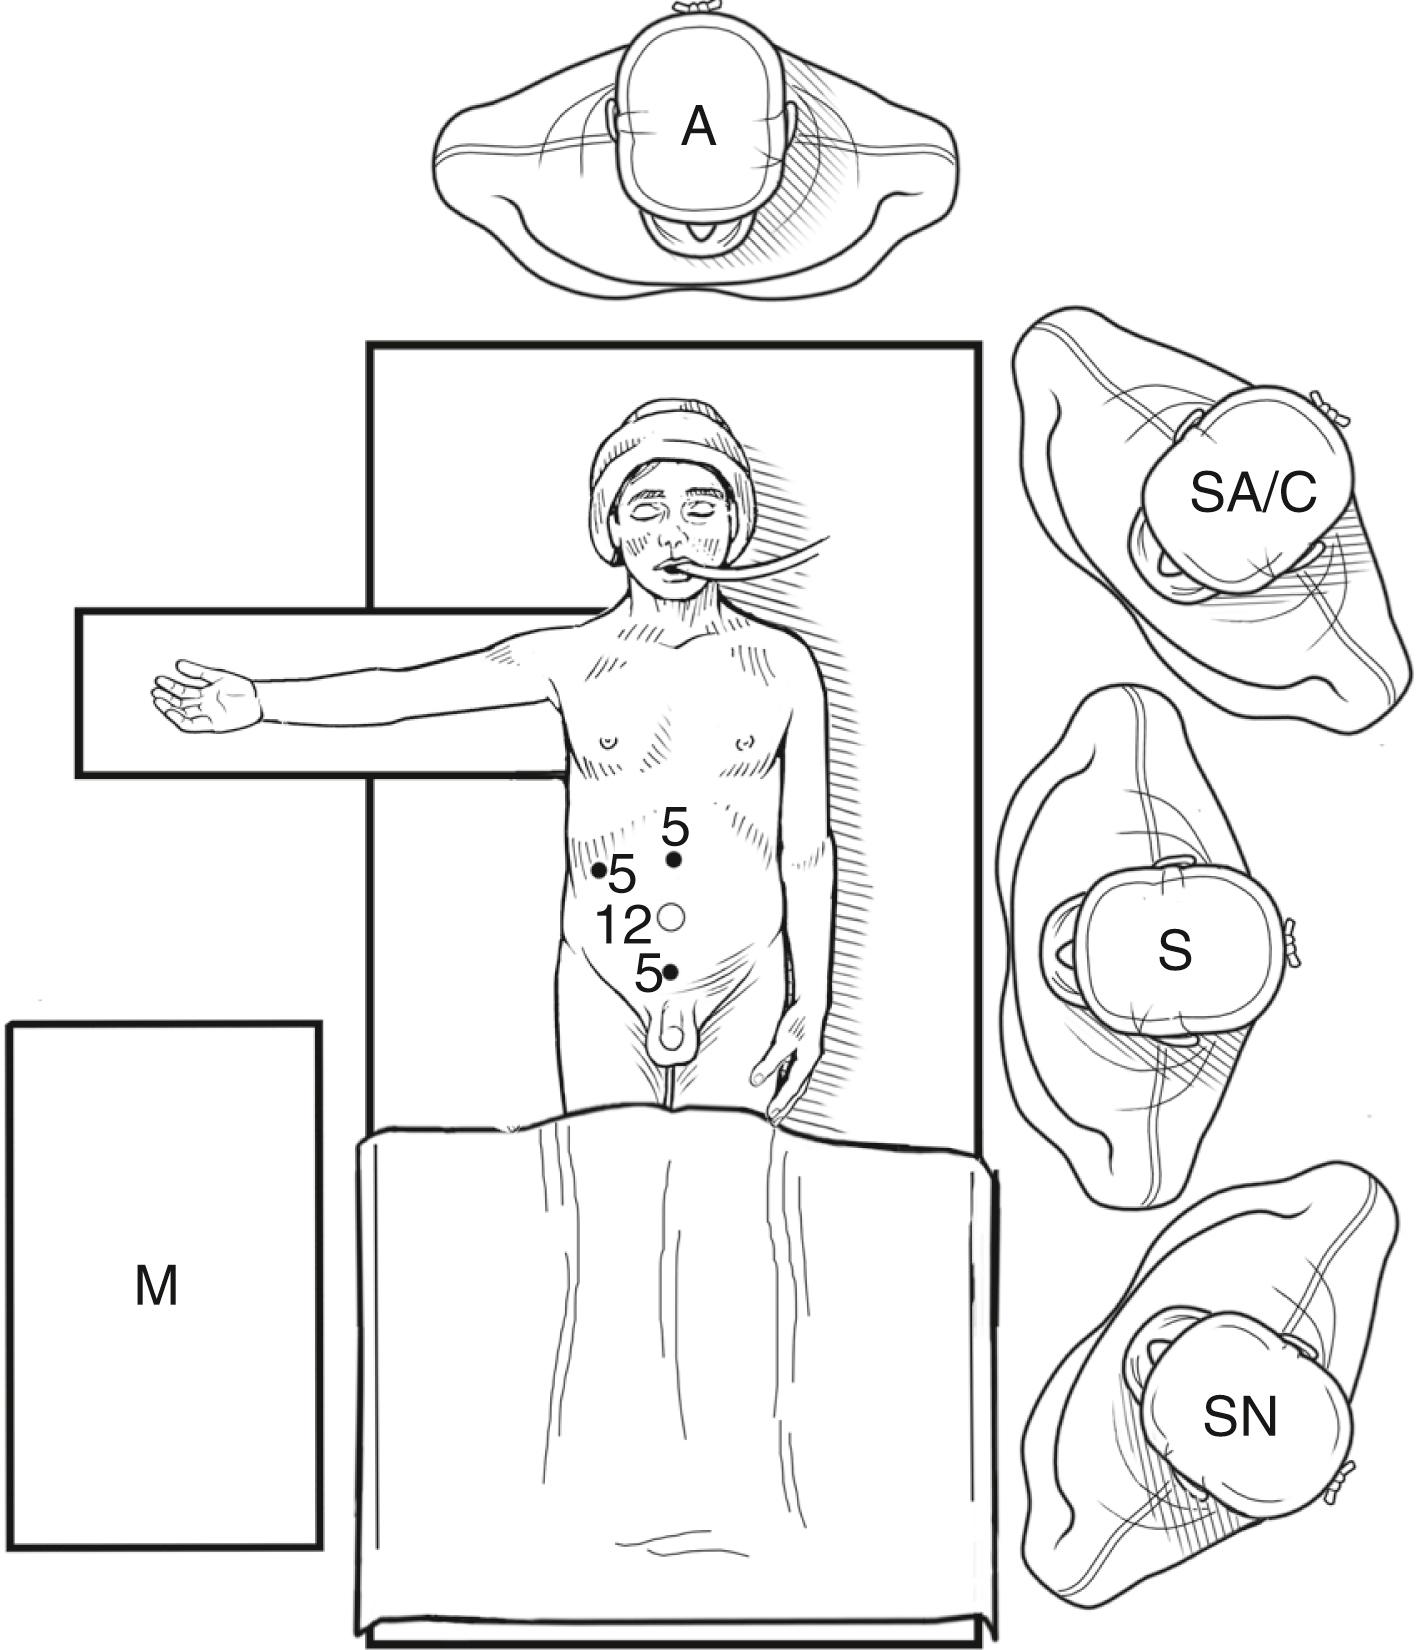 Fig. 8-1, For a traditional laparoscopic ileocecectomy for Crohn disease, the patient is placed supine on the operating table. The surgeon (S) and surgical assistant/camera holder (SA/C) are positioned on the patient’s left side. The viewing monitor (M) is positioned to the right of the patient at the level of the iliac crest. The scrub nurse (SN) is positioned according to surgeon preference. Usually, a 12-mm port is introduced through the umbilicus, which will be the initial port for the telescope/camera, for access for the endoscopic stapler, and for removal of the specimen if an intracorporeal anastomosis is performed or exteriorization of the bowel for an extracorporeal resection/anastomosis. Two or three additional ports are then inserted. Two 5-mm operating ports are positioned, one in the midepigastric area and the other in the suprapubic area. In addition, a 5-mm retraction port can be placed in the patient’s right upper abdomen, if needed. A, anesthesiologist.